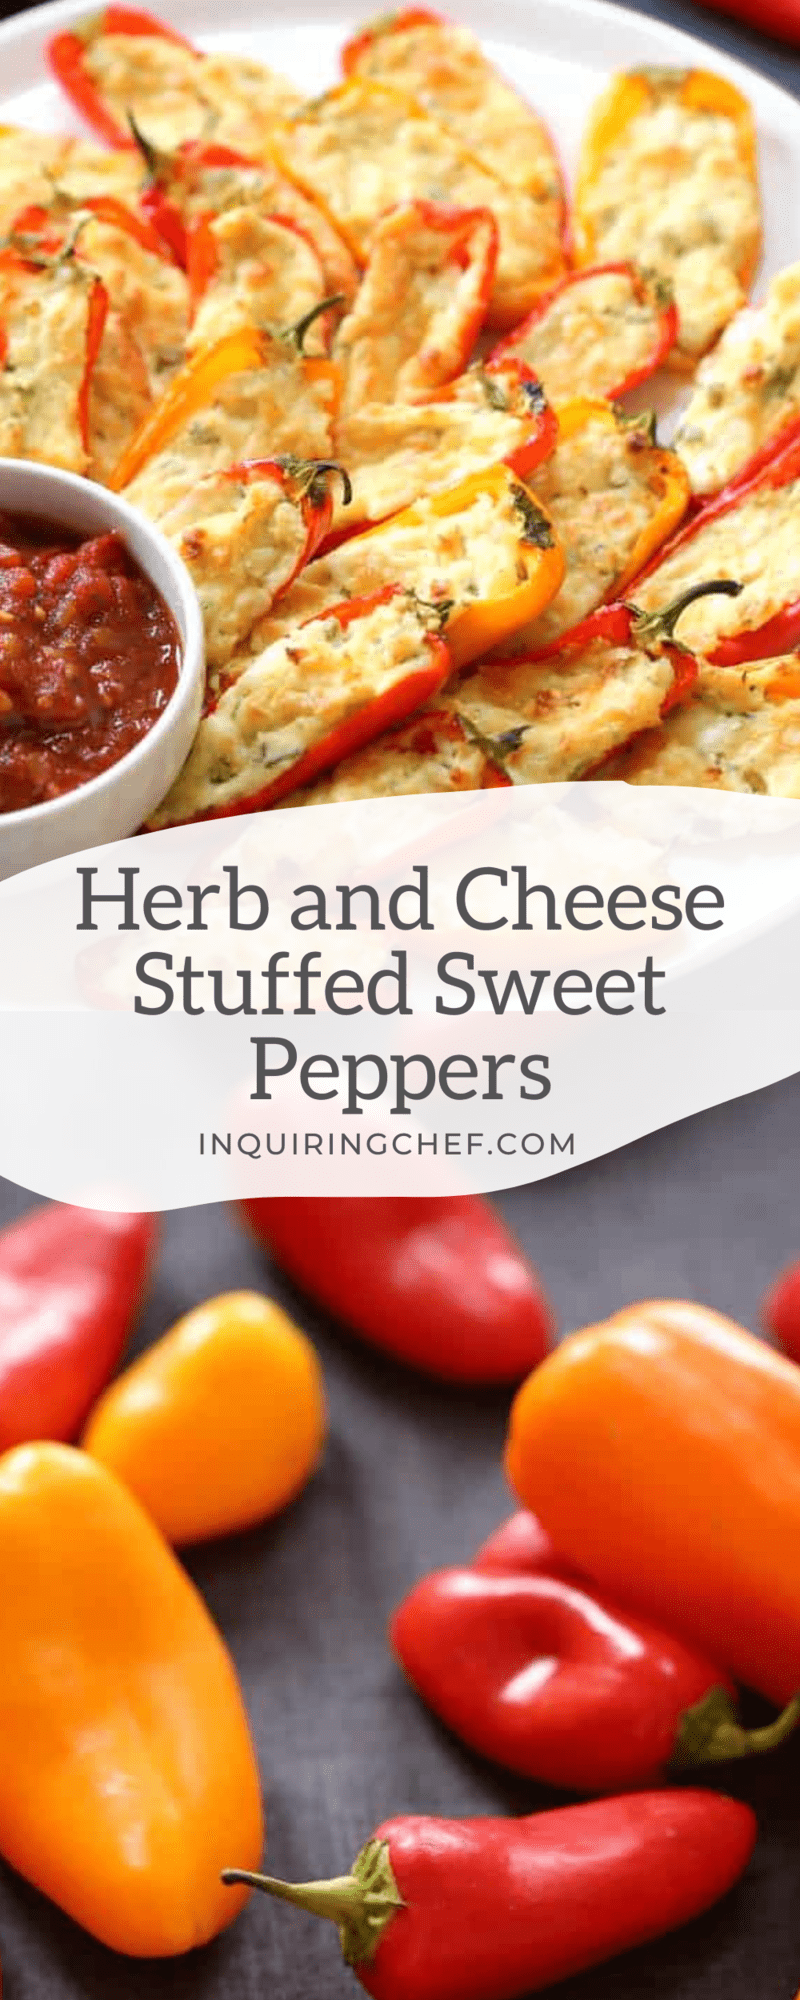 Herb and Cheese Stuffed Sweet Peppers Recipe